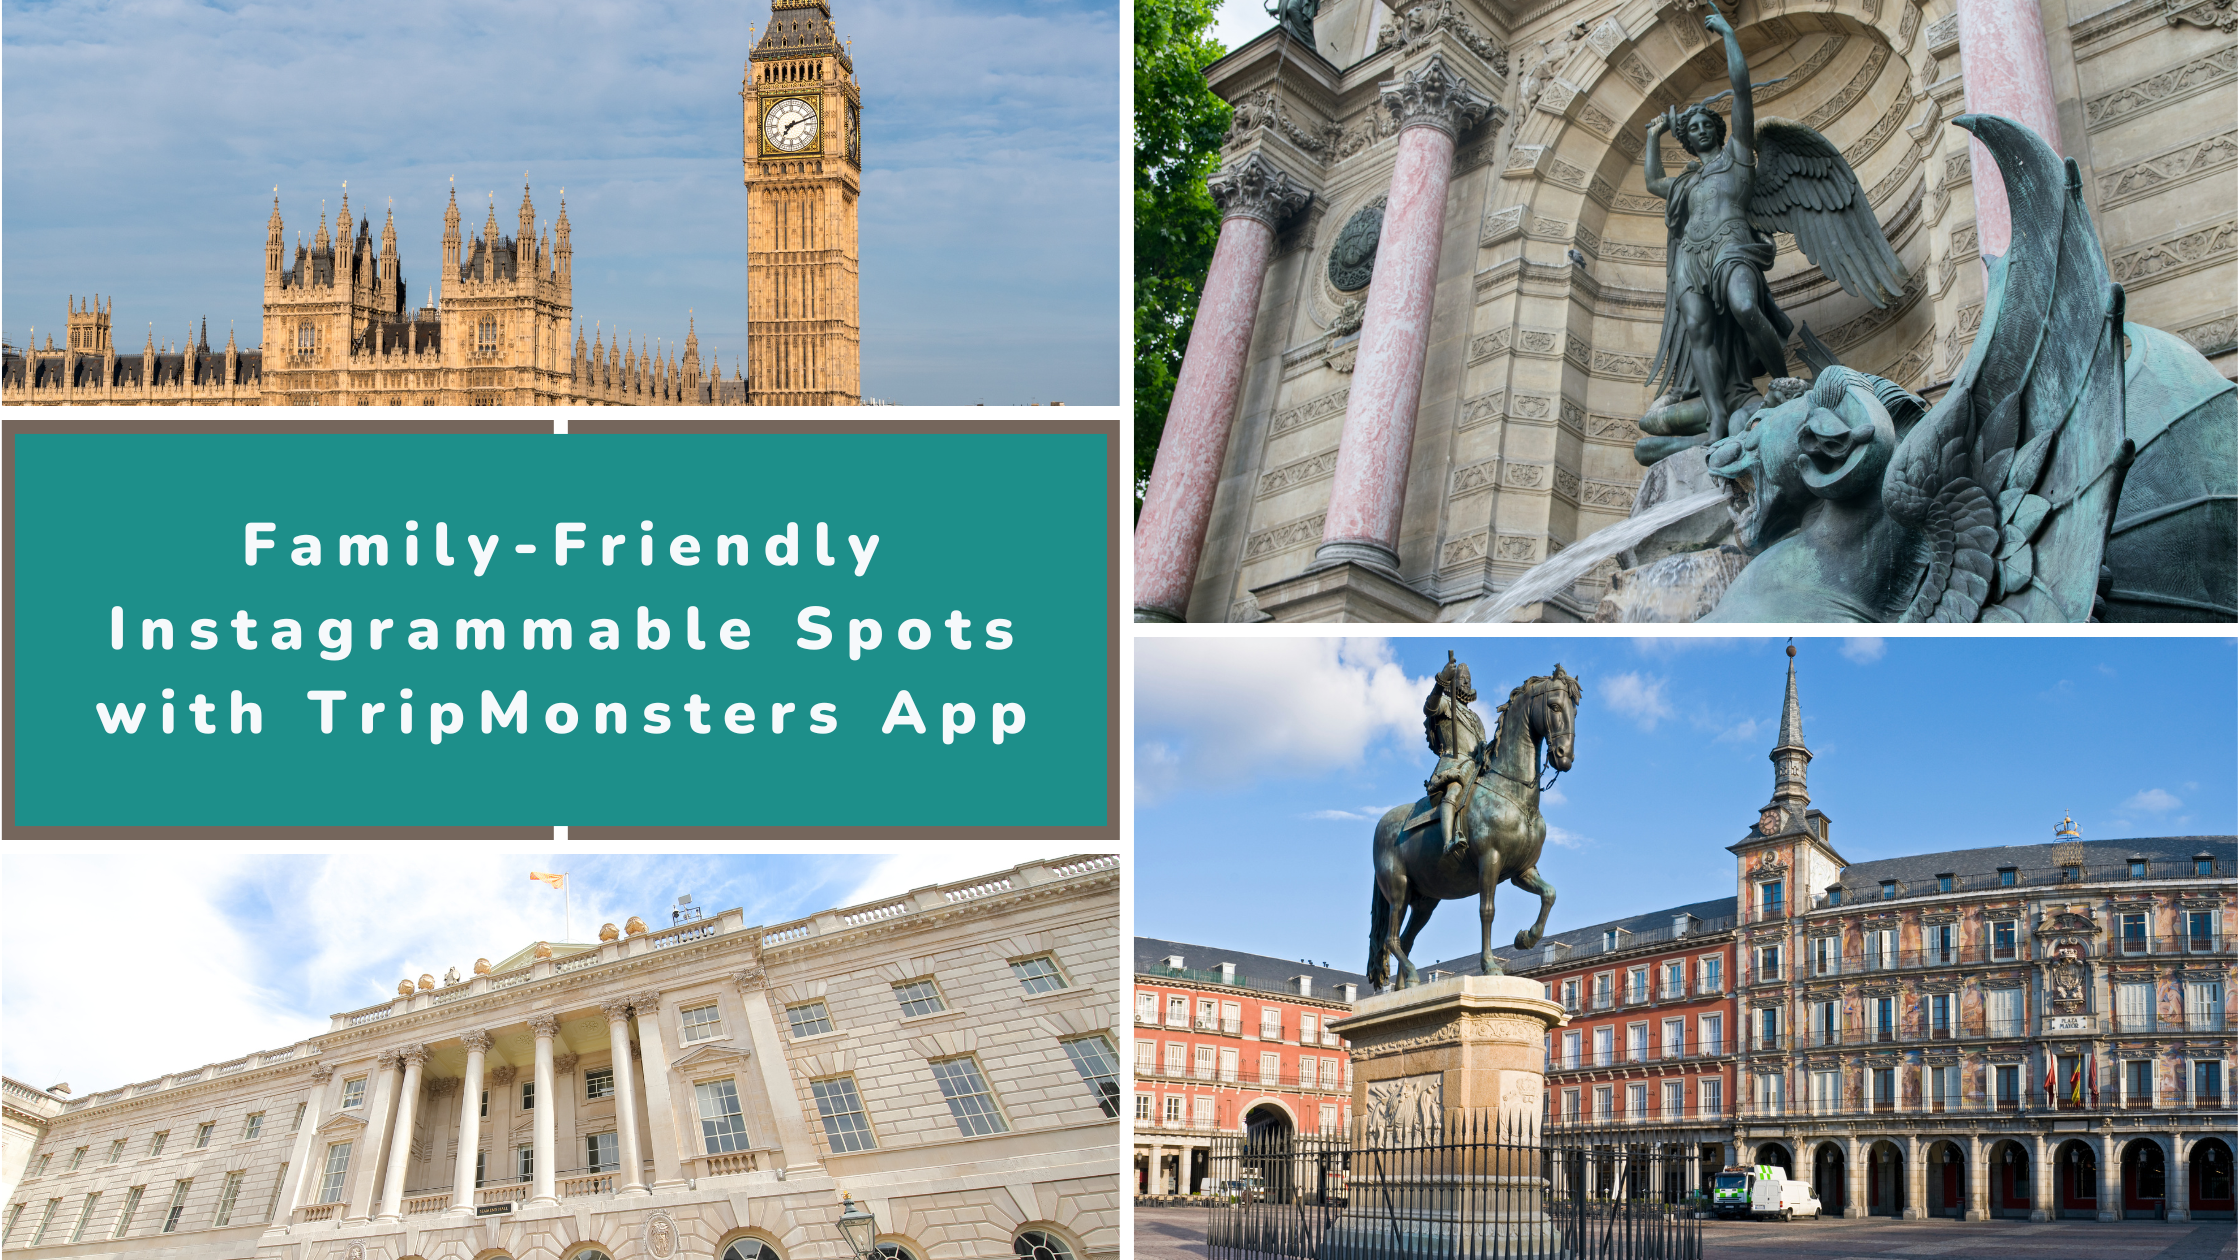 Top 10 Family-Friendly Instagrammable Spots with TripMonsters App